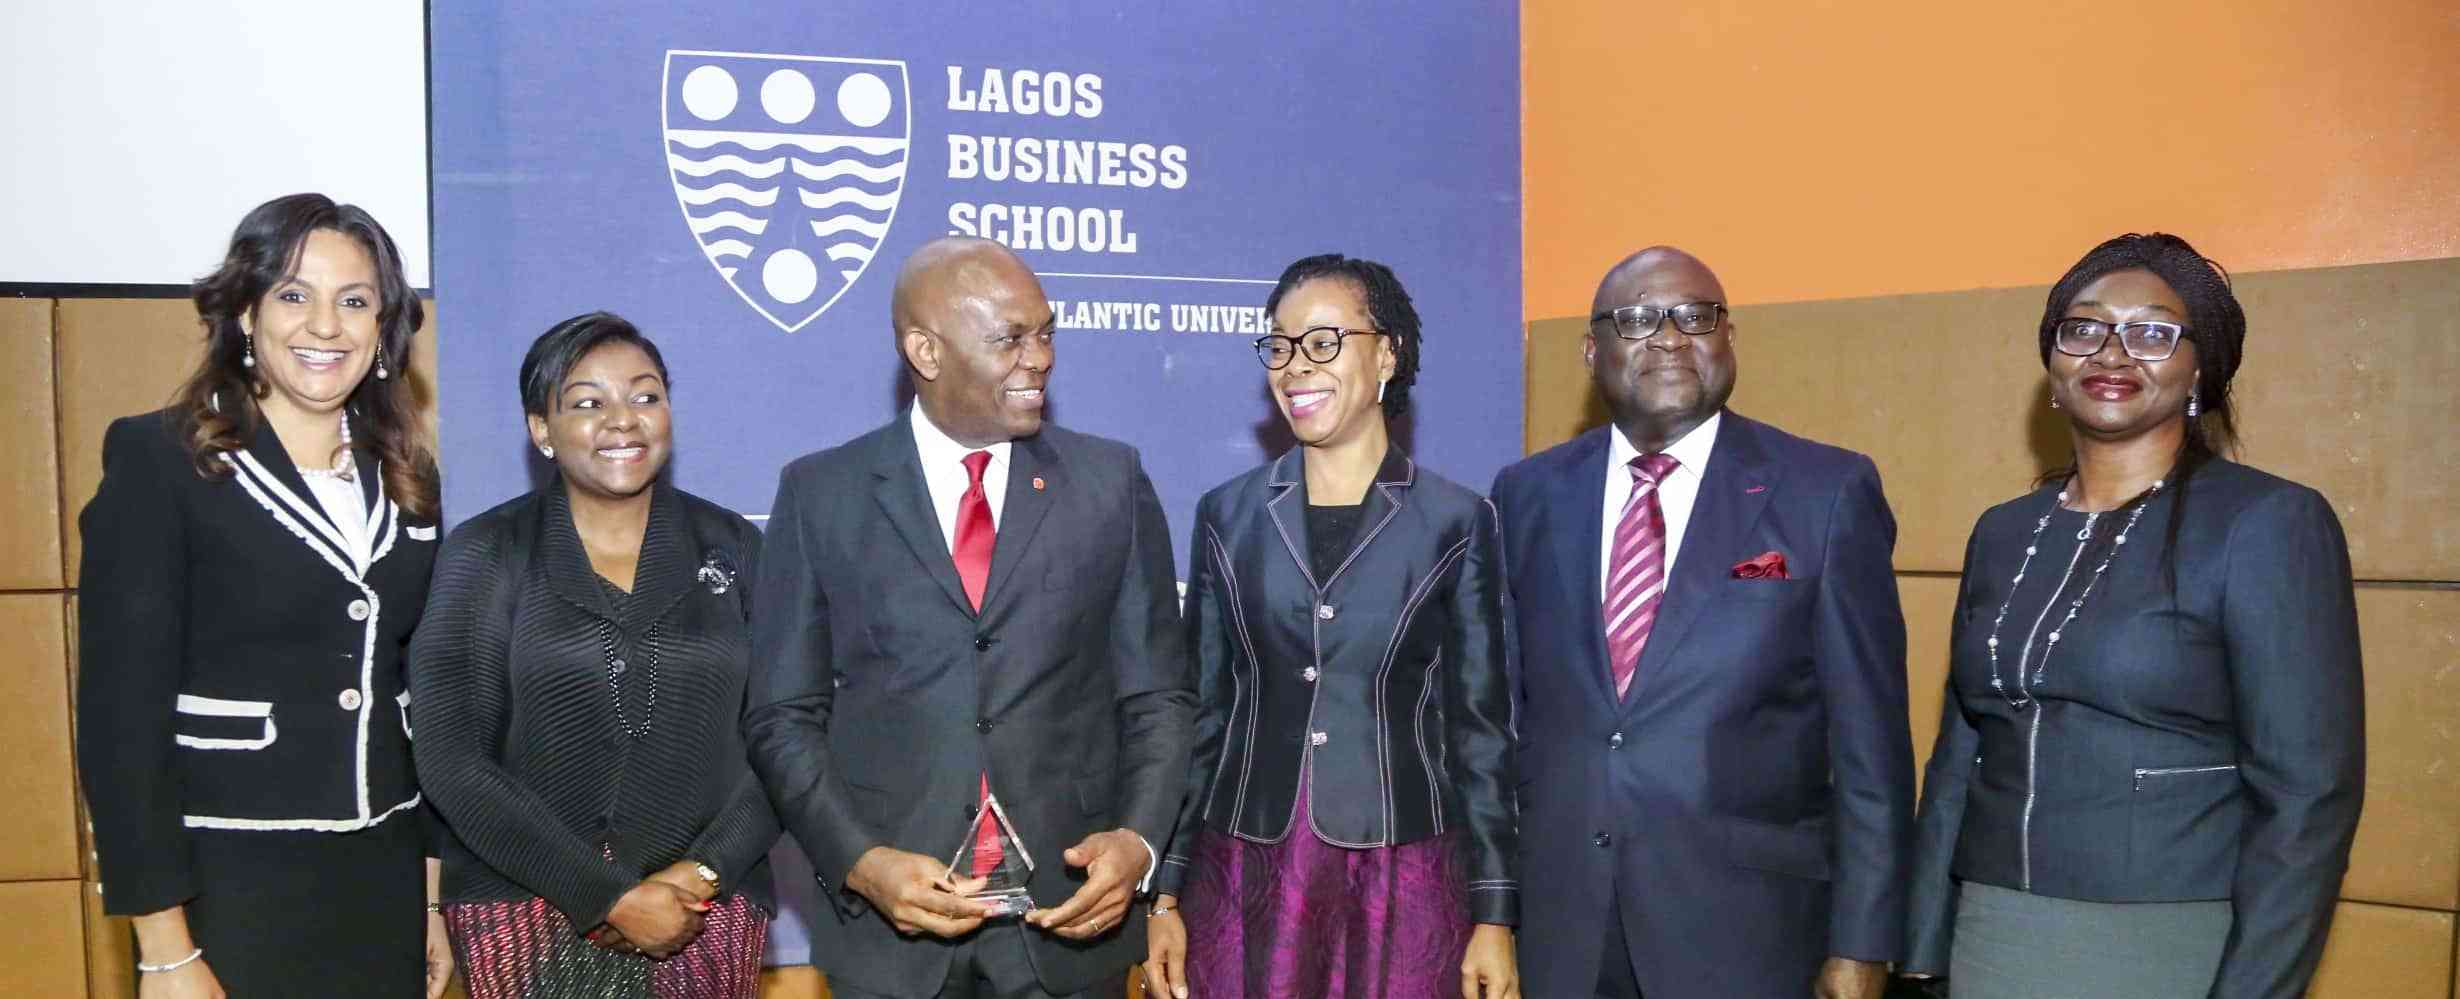 Lagos Business School Ranking, Admission Requirements and Fees : Current  School News